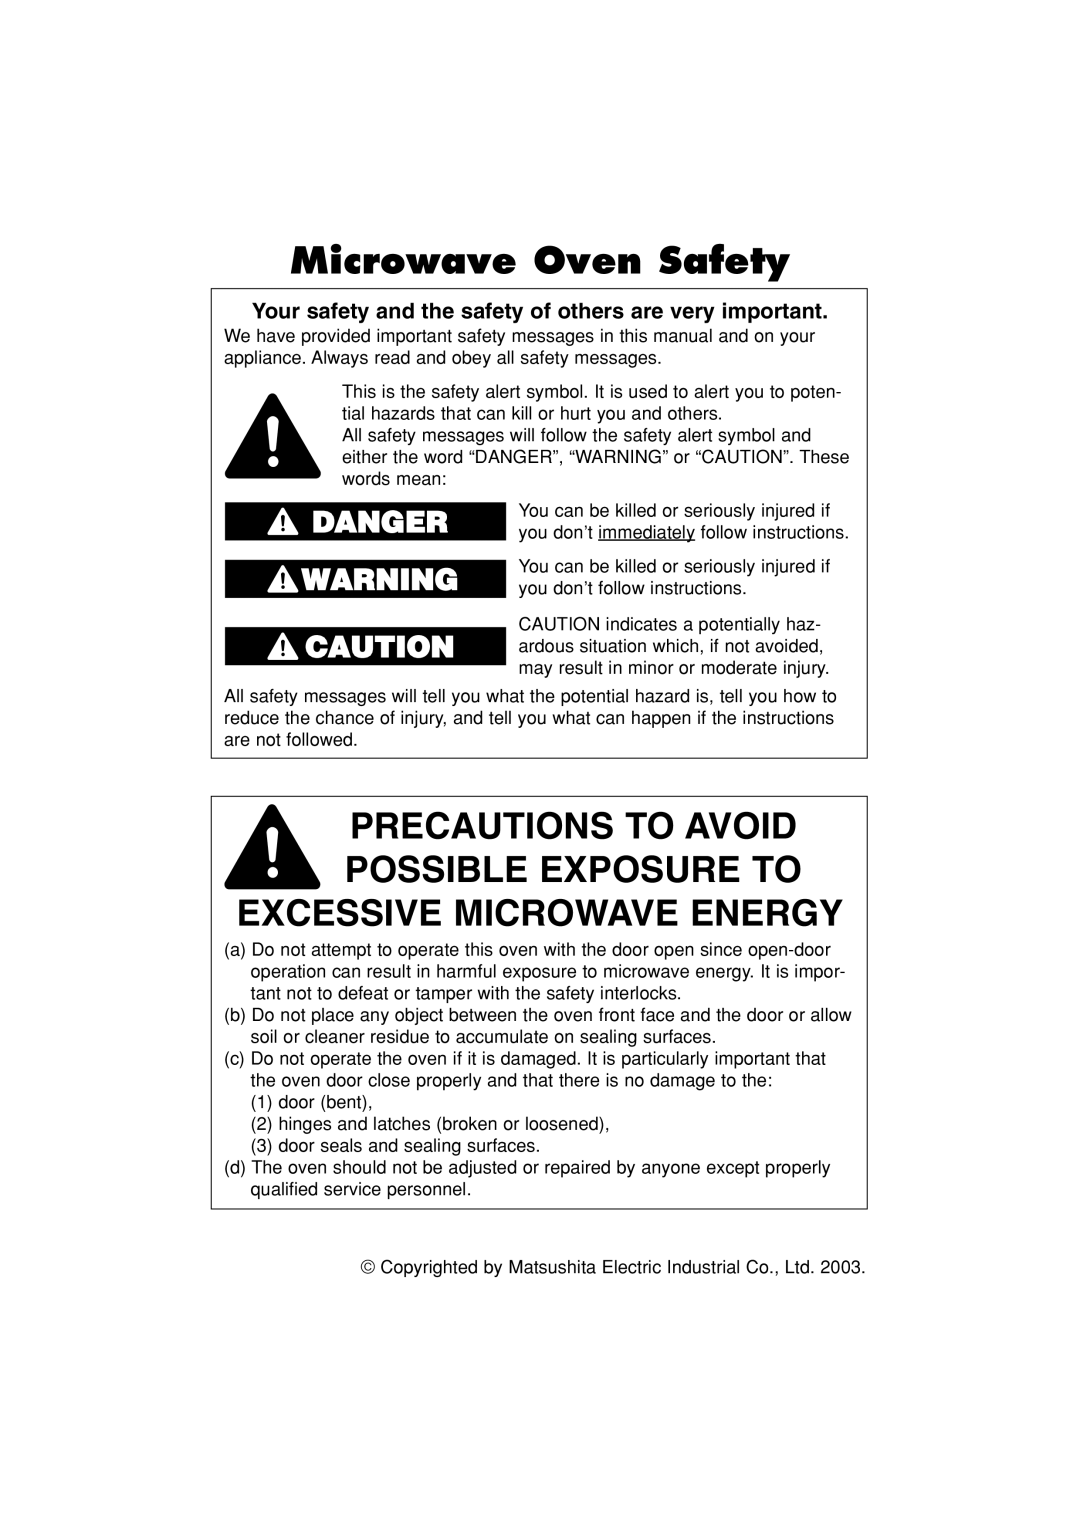 Panasonic NN-S753 Excessive Microwave Energy, Precautions To Avoid Possible Exposure To, Microwave Oven Safety, Danger 